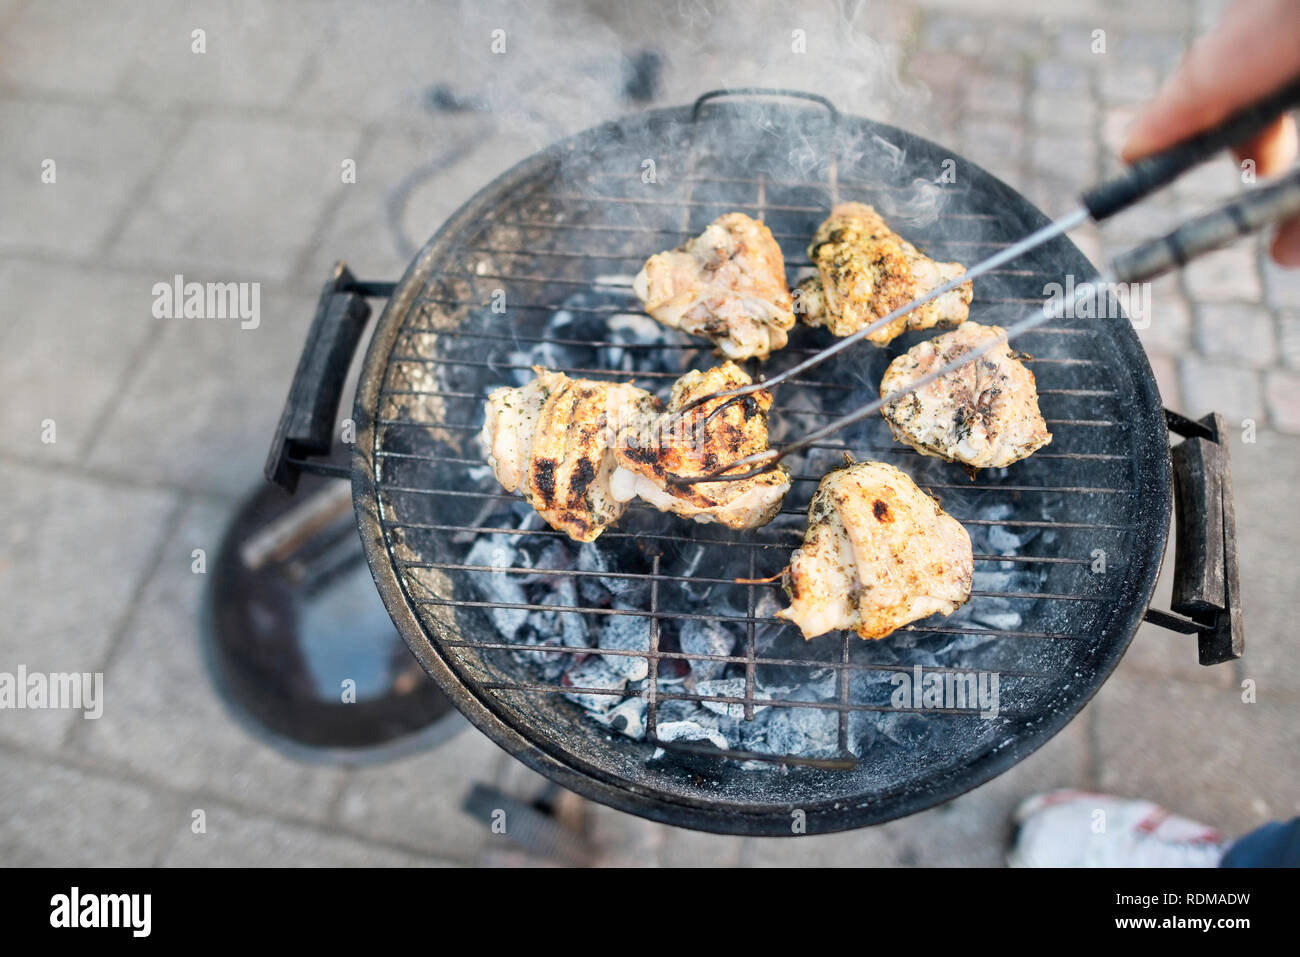 Meat on barbecue Stock Photo